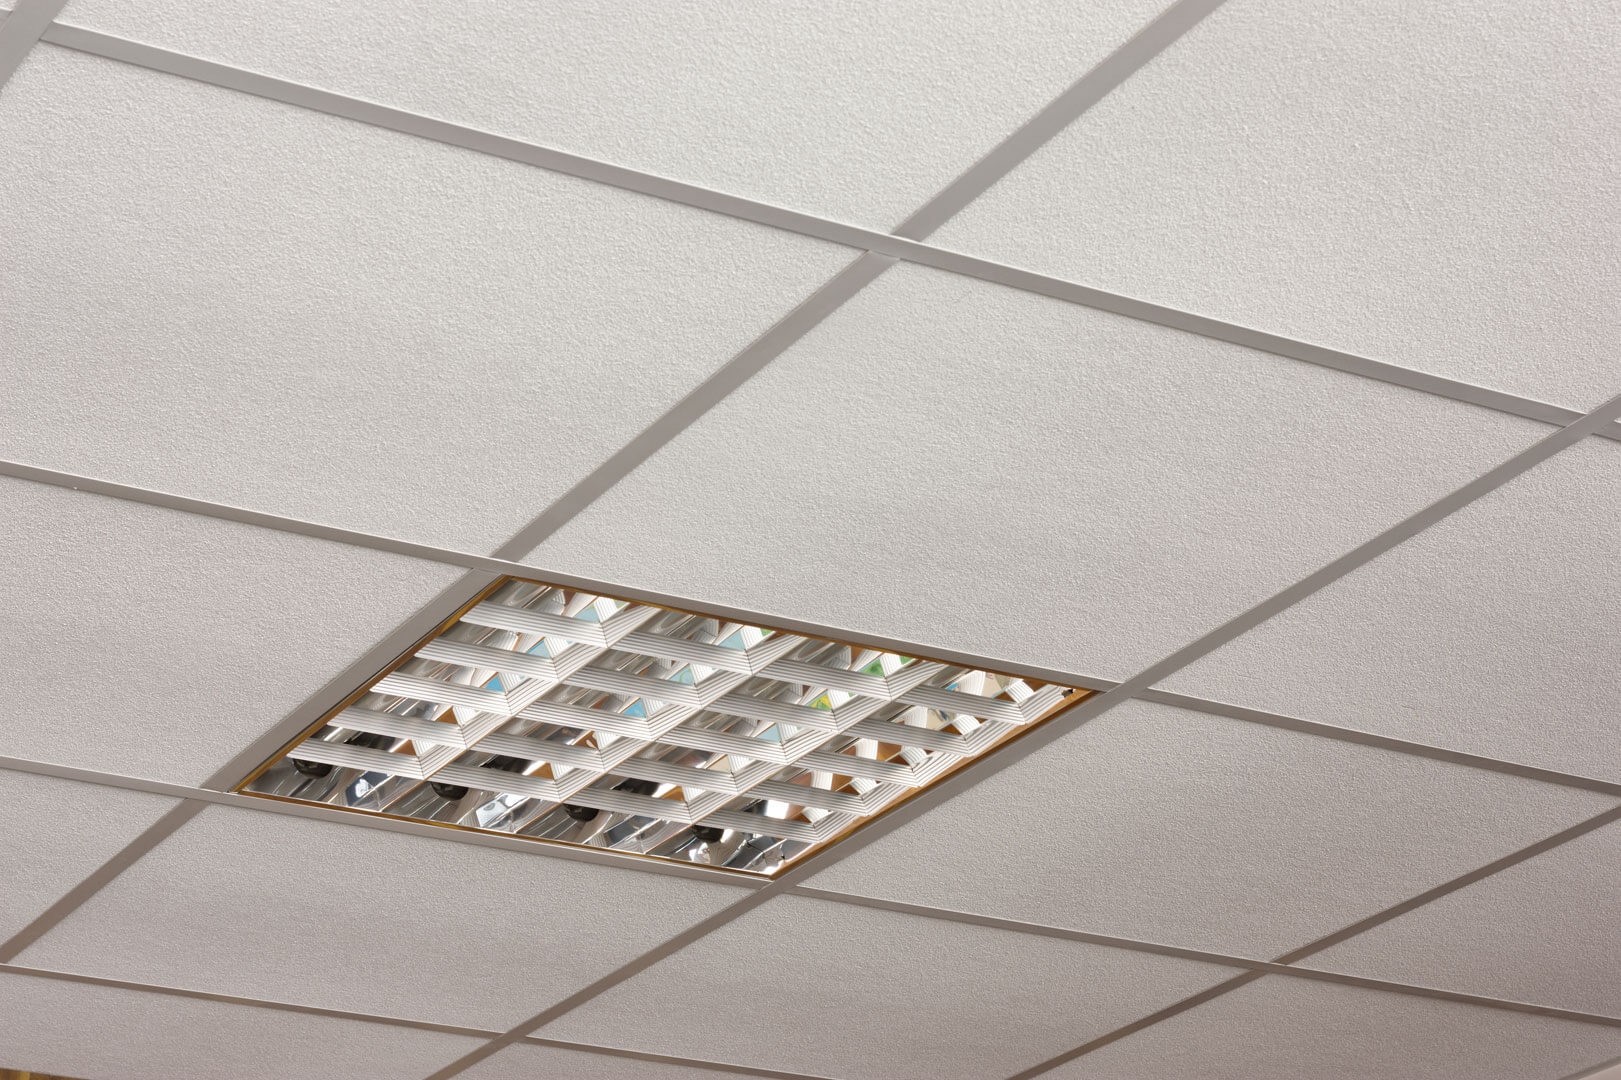 Pictures Of Suspended Ceiling Tiles Pictures Of Suspended Ceiling Tiles ceiling tiles lights accessories a leading uk supplier of 1621 X 1080